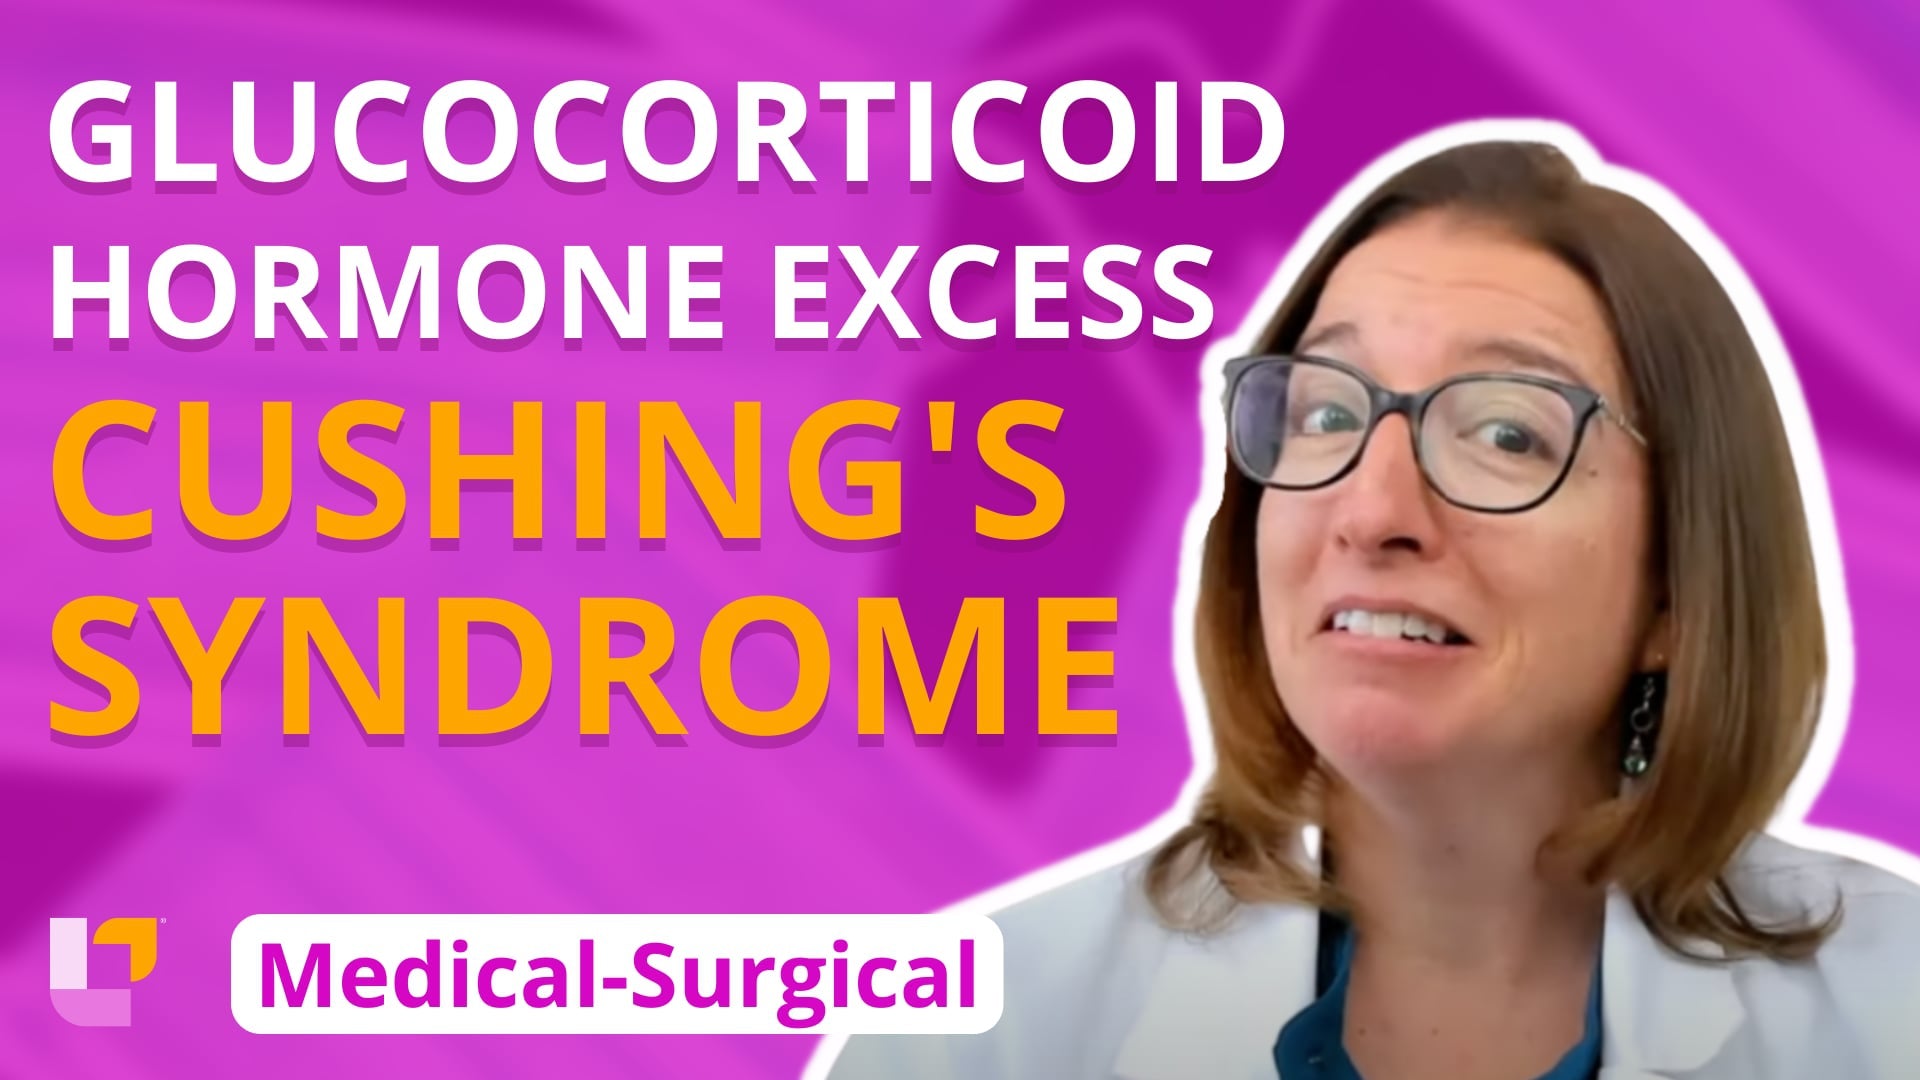 Med-Surg Endocrine System, part 12: Glucocorticoid Hormone Excess (Cushing's Syndrome) - LevelUpRN